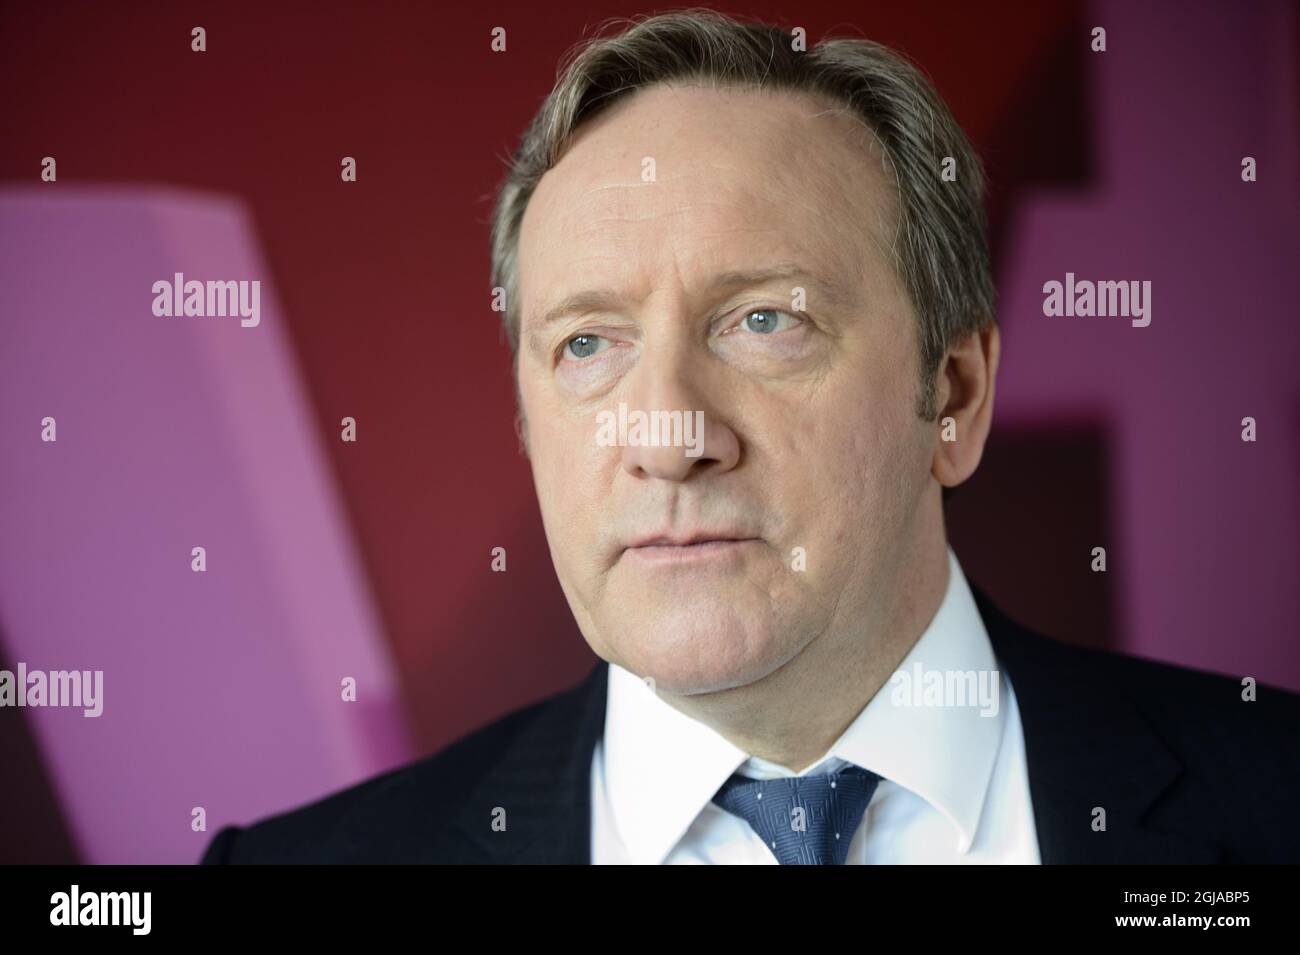 STOCKHOLM 2016-11-24 Neil Dudgeon is seen during his visit to Stockholm, Sweden, November 24, 2016. Neil Dudgeon stars as Chief Inspector John Barnaby in the television crime series Â“Midsomer MurdersÂ” which celebrates its 20th anniversary. Foto: Henrik Montgomery / TT / kod 10060  Stock Photo